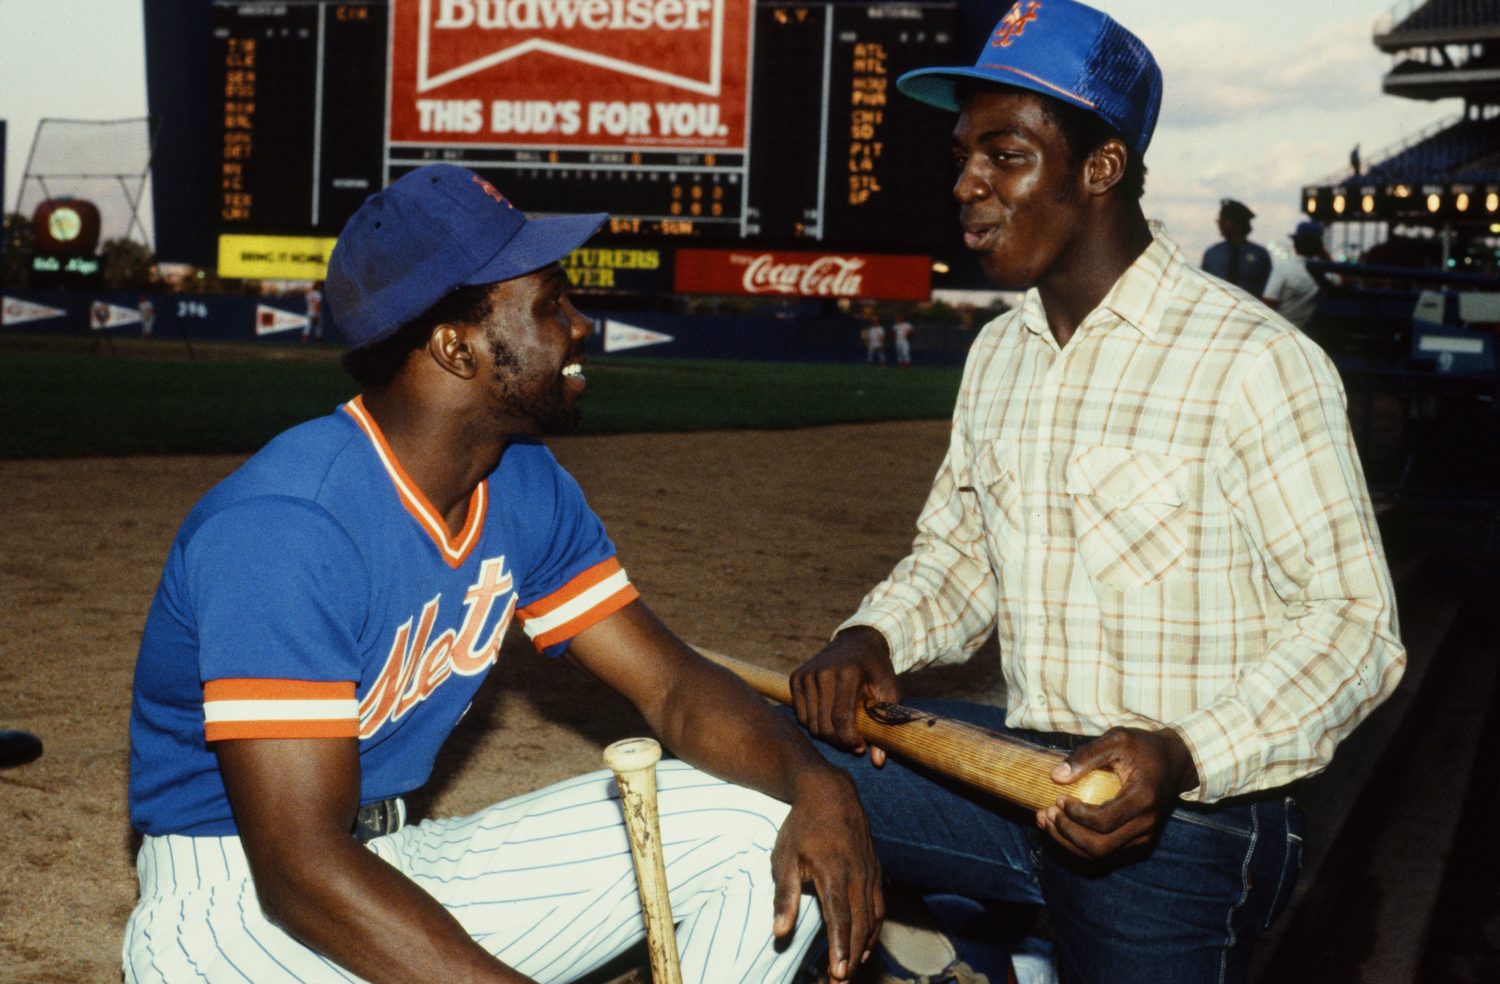 Mookie Wilson Chatting with Unknown Person at Shea Stadium